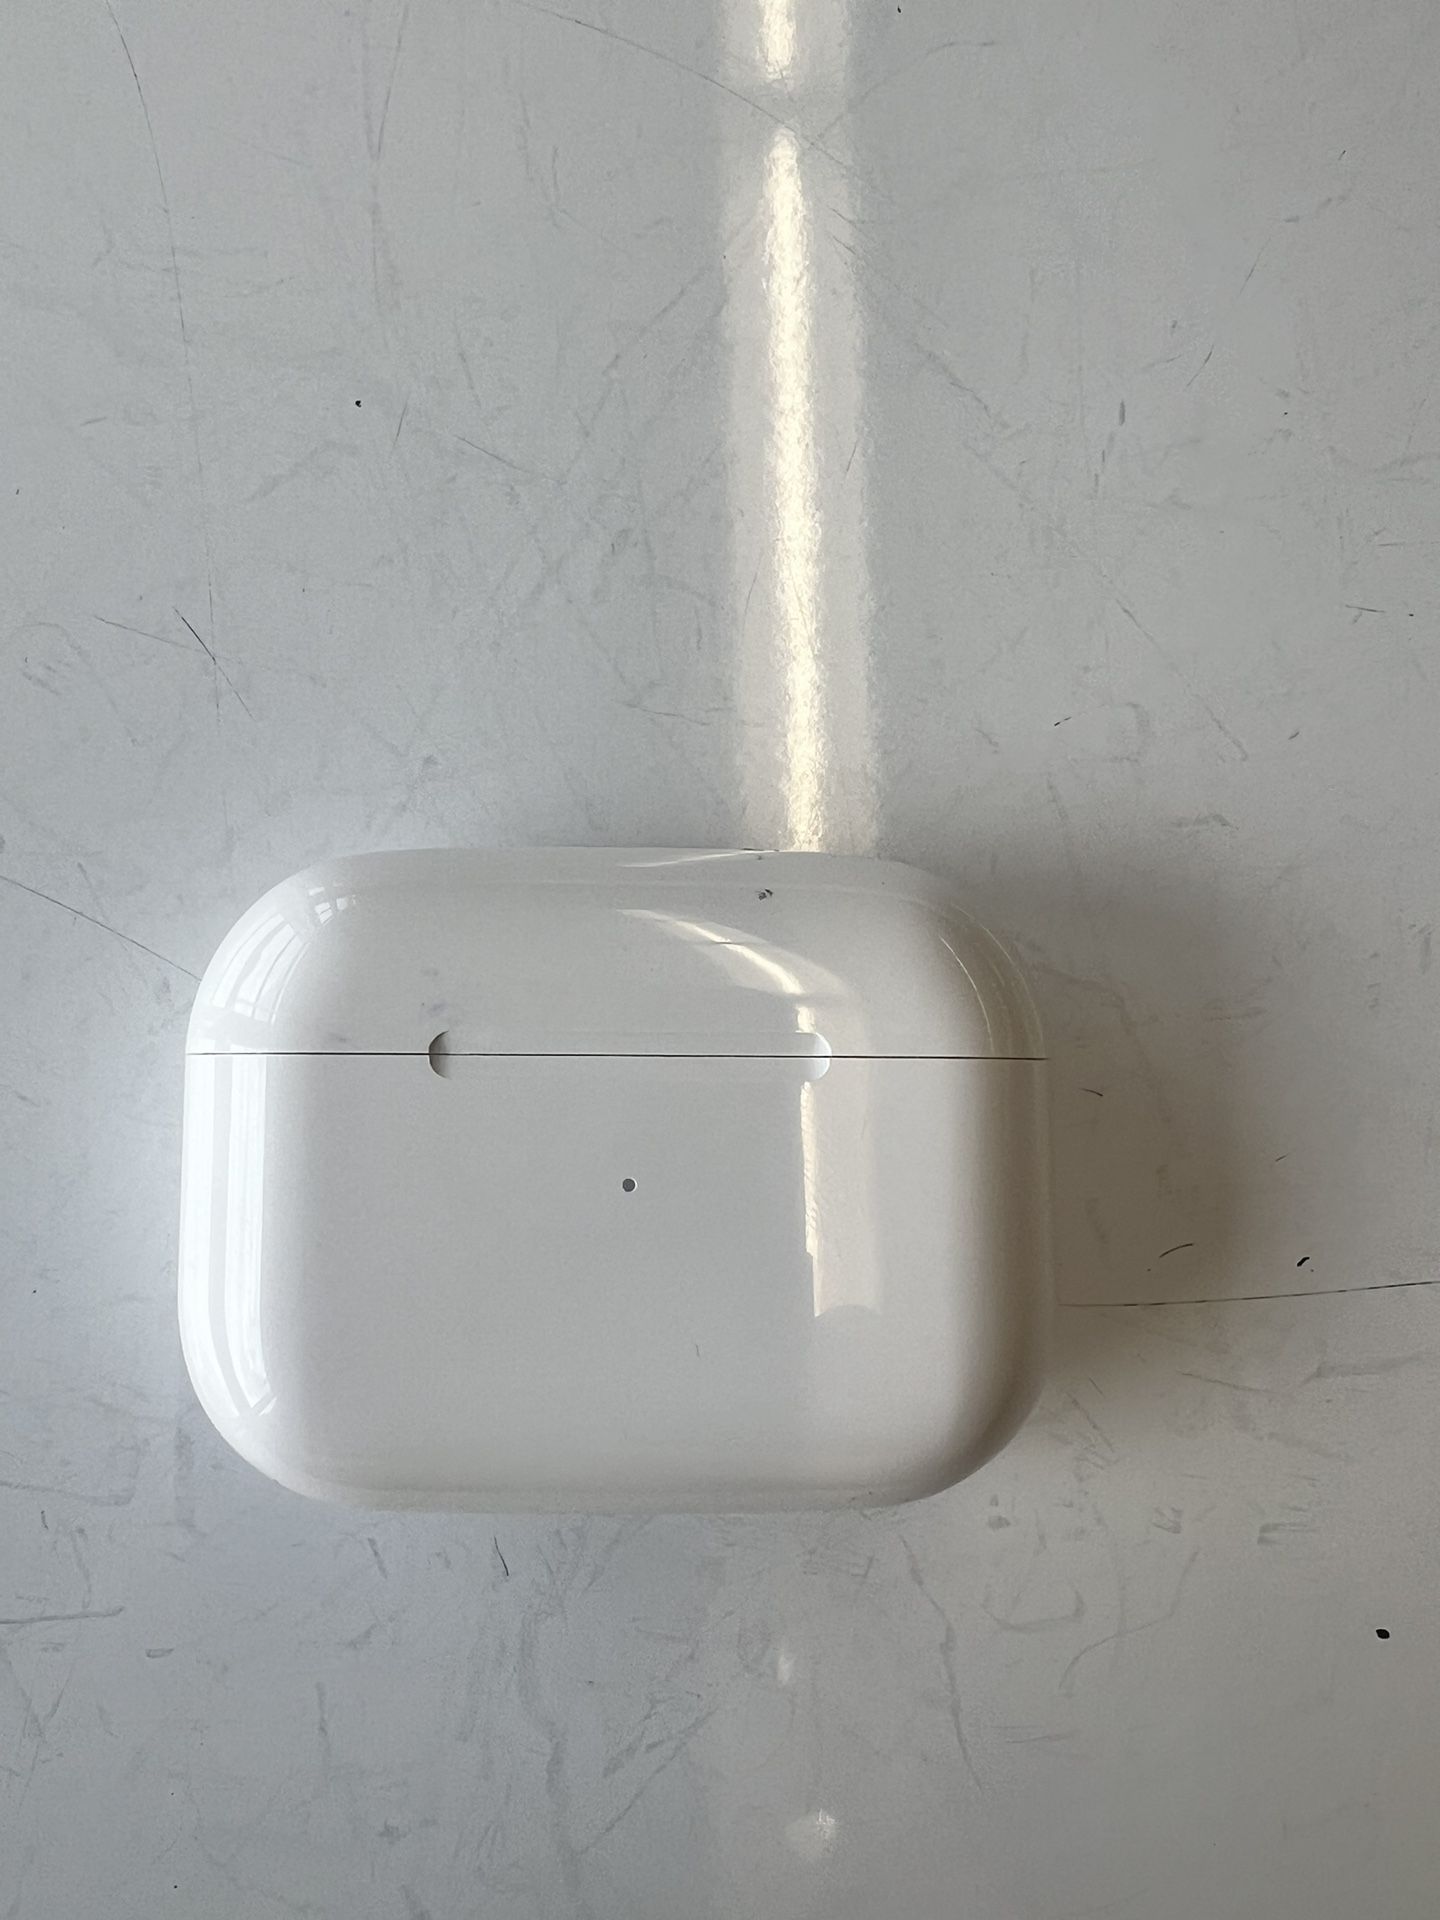 Brand New Airpods Pros